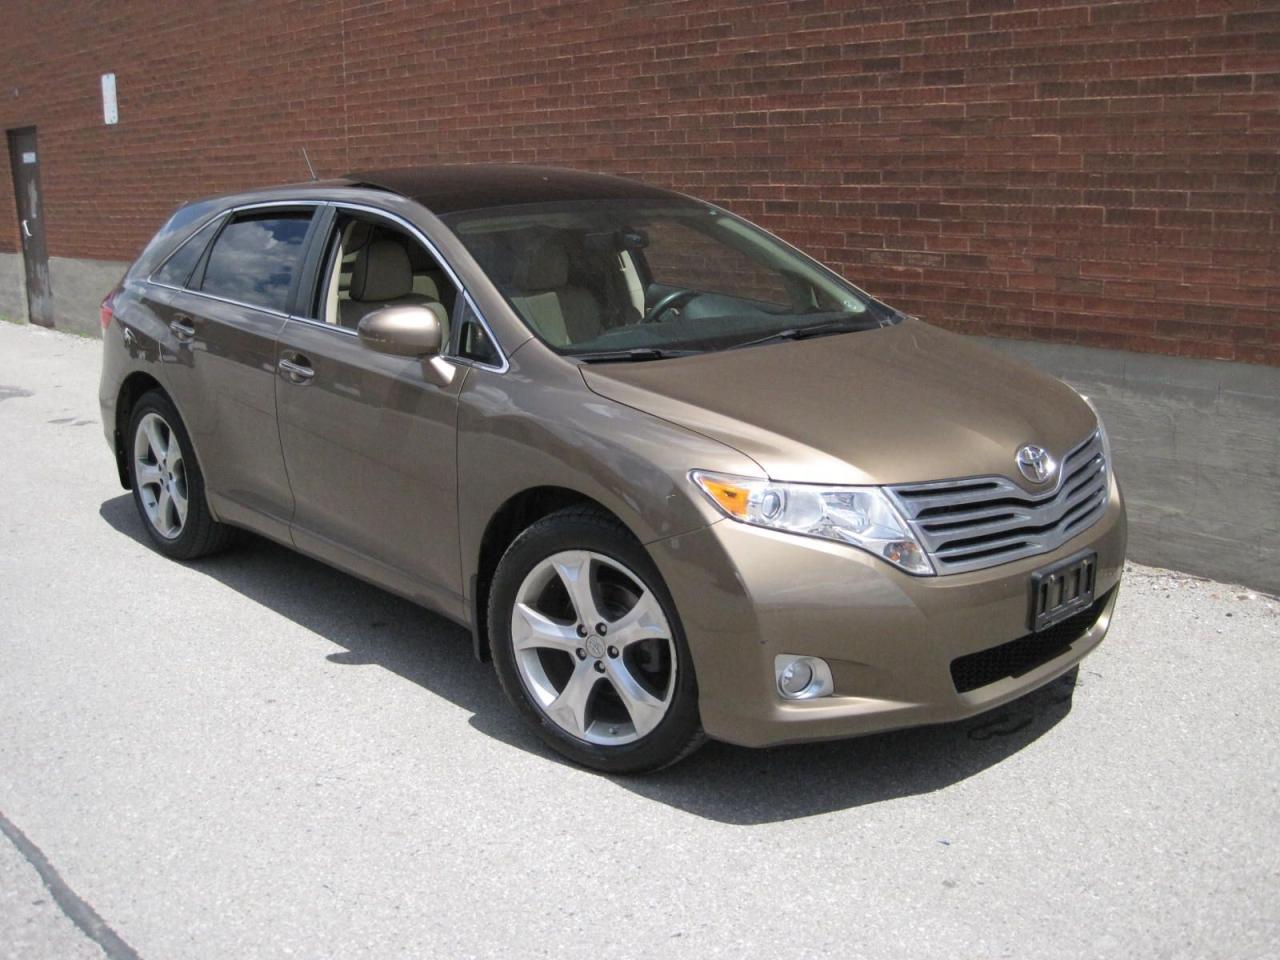 2009 Toyota Venza TOURING PACKAGE - ONLY 80,816 KMS.!! 1 OWNER! - Photo #1